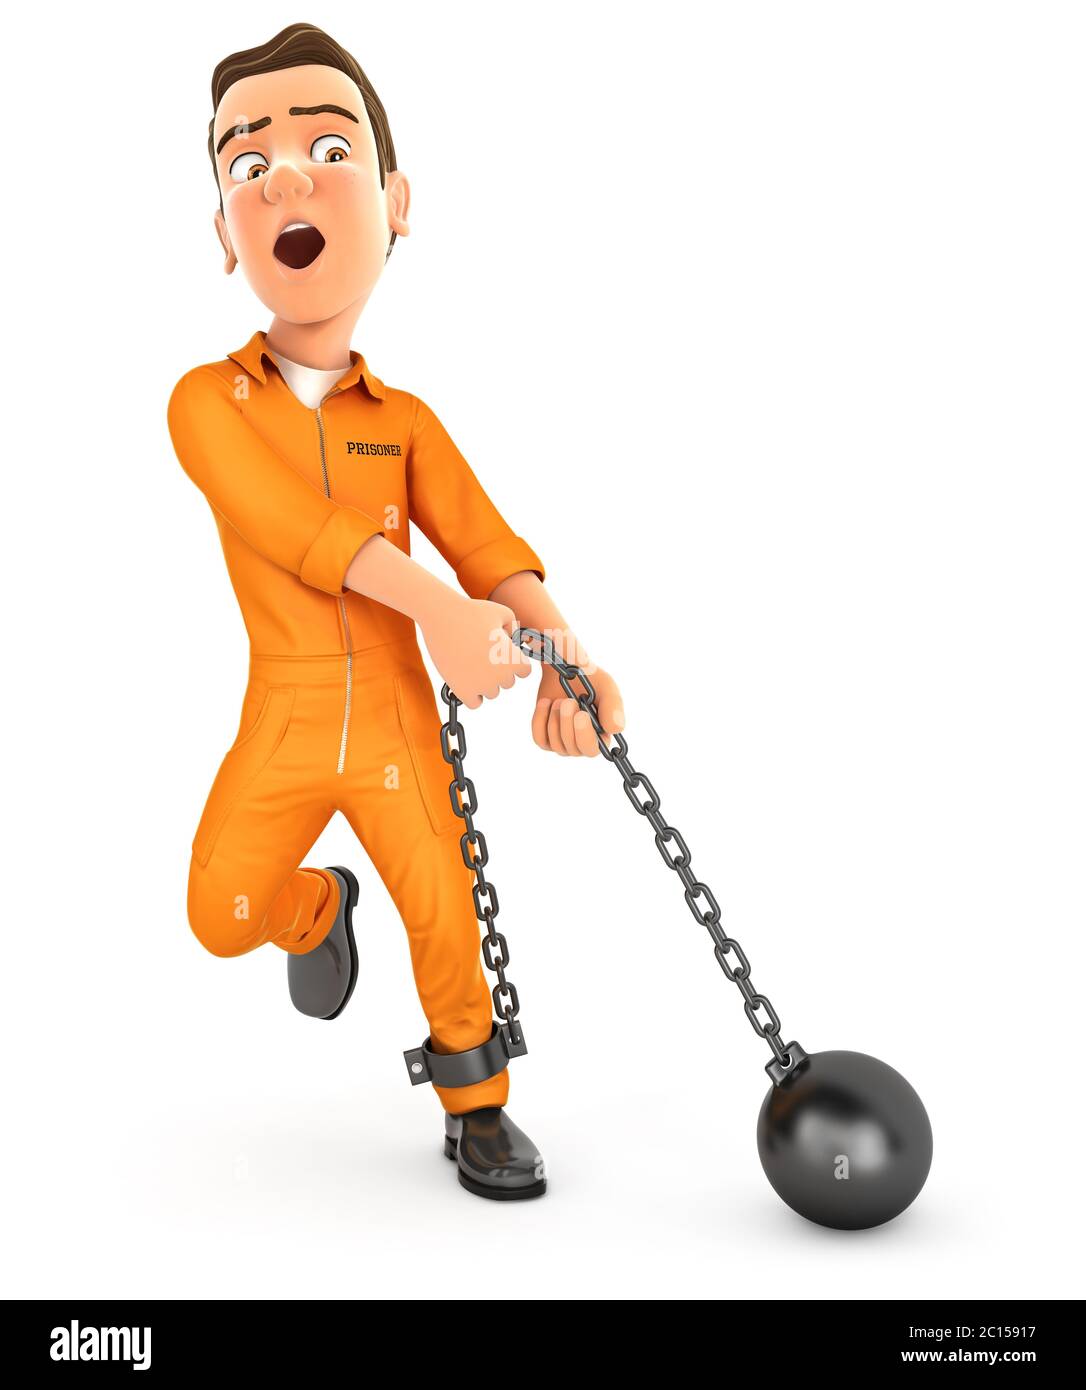 3d prisoner trying to lift ball and chain, illustration with isolated white background Stock Photo